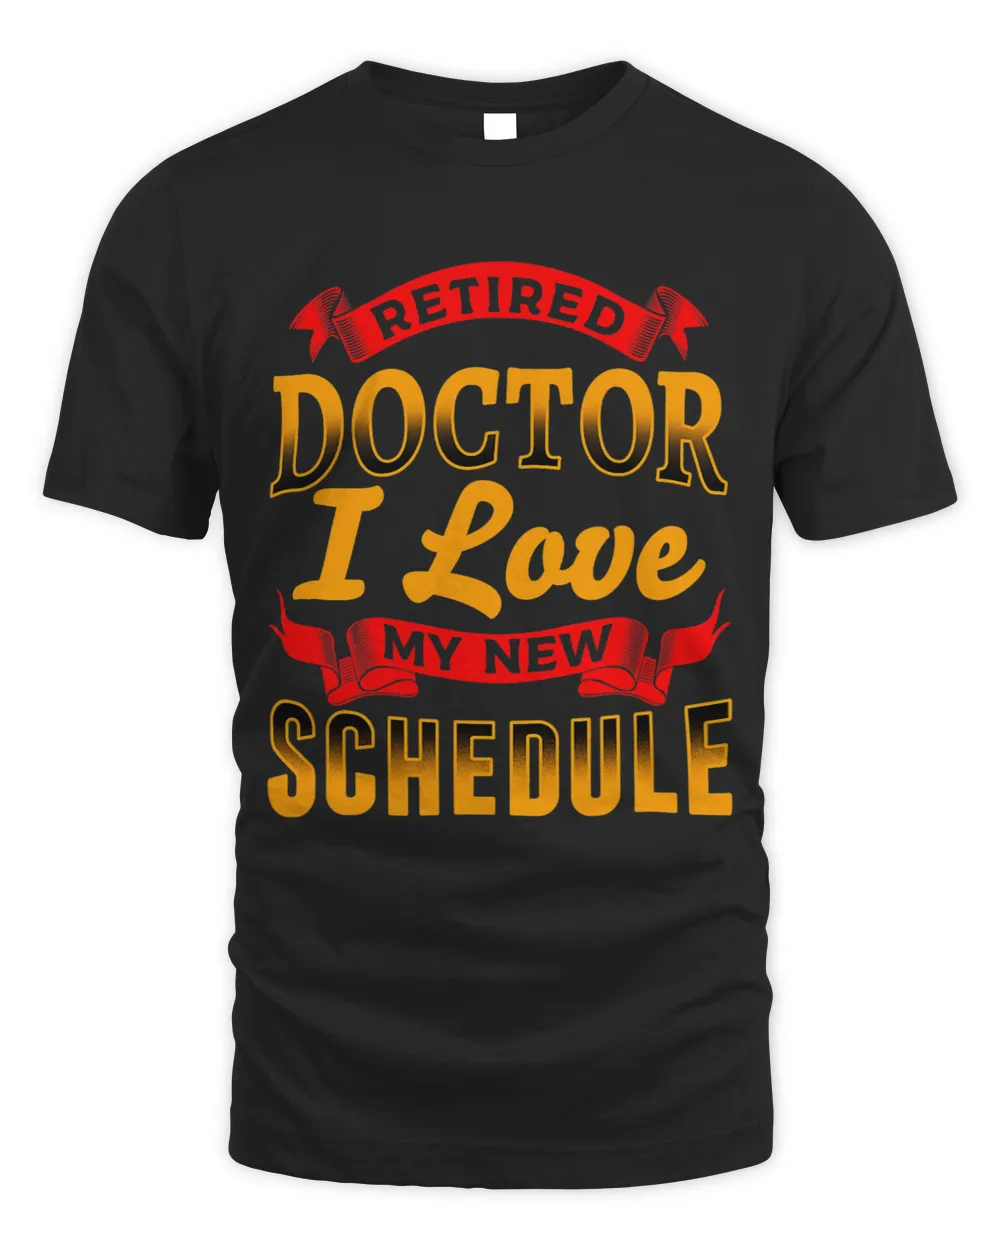 RETIRED DOCTOR LOVE MY NEW SCHEDULE Funny Retirement